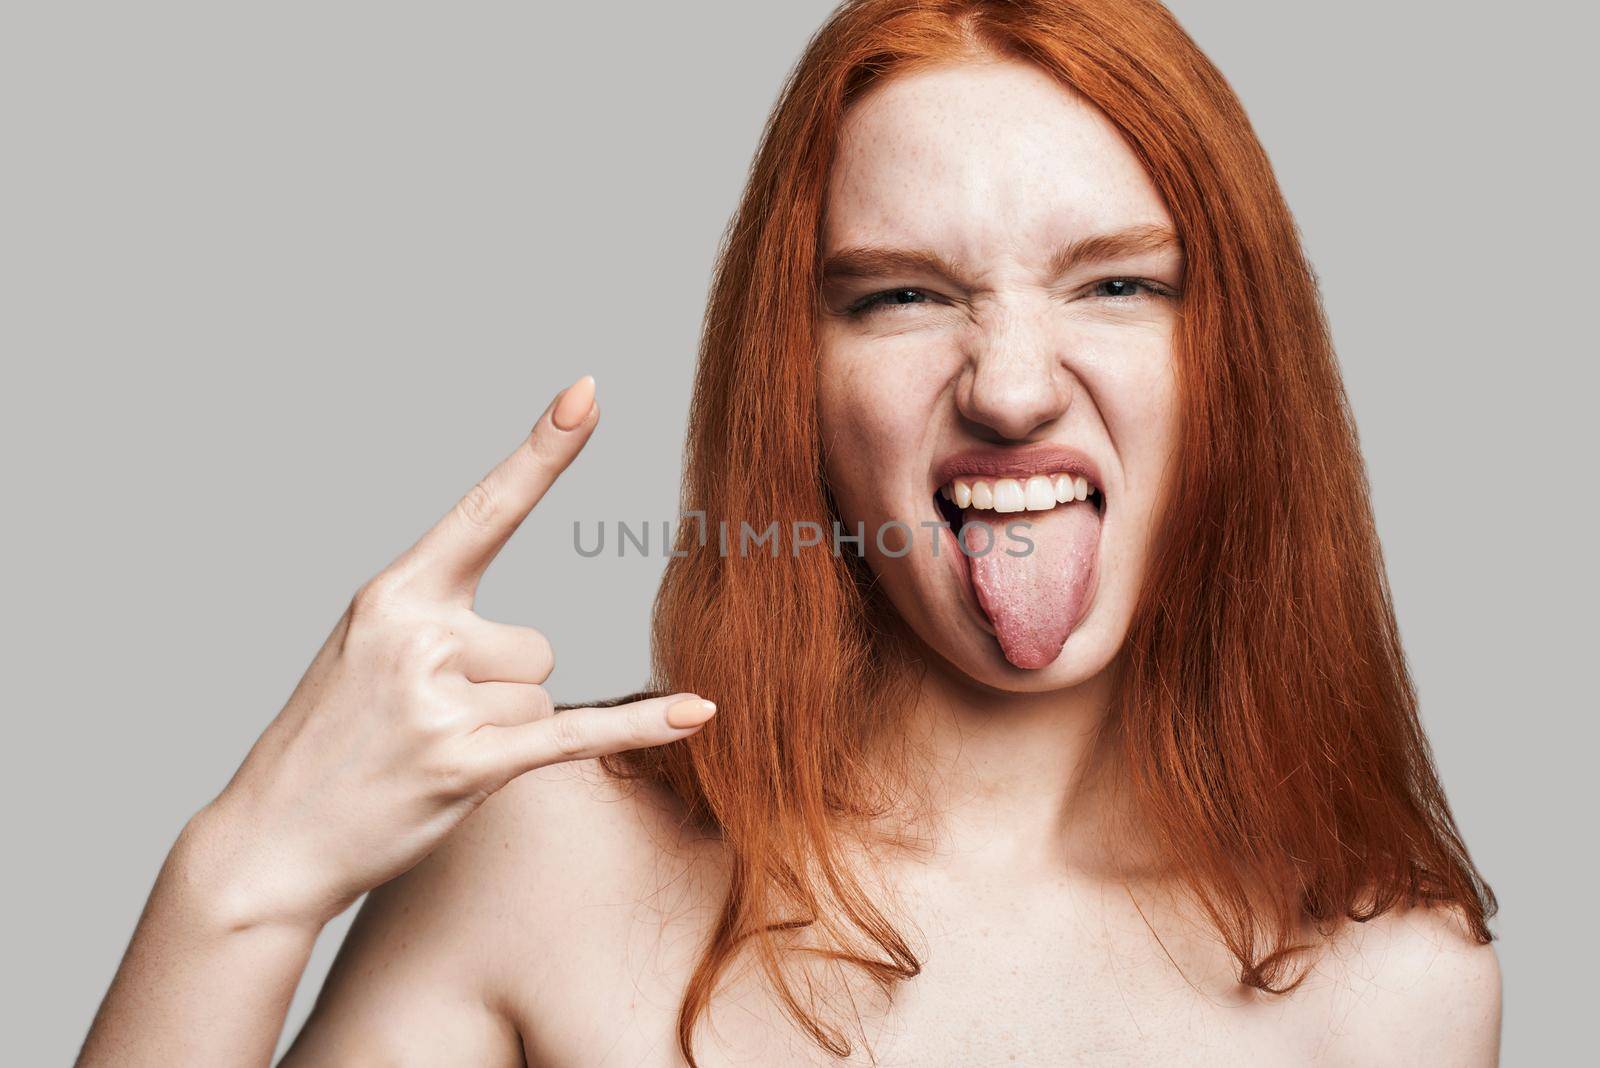 Studio shot of young and cute teenage girl with long red hair showing hand sign and sticking out tongue while standing against grey background. Gesturing. Carefree